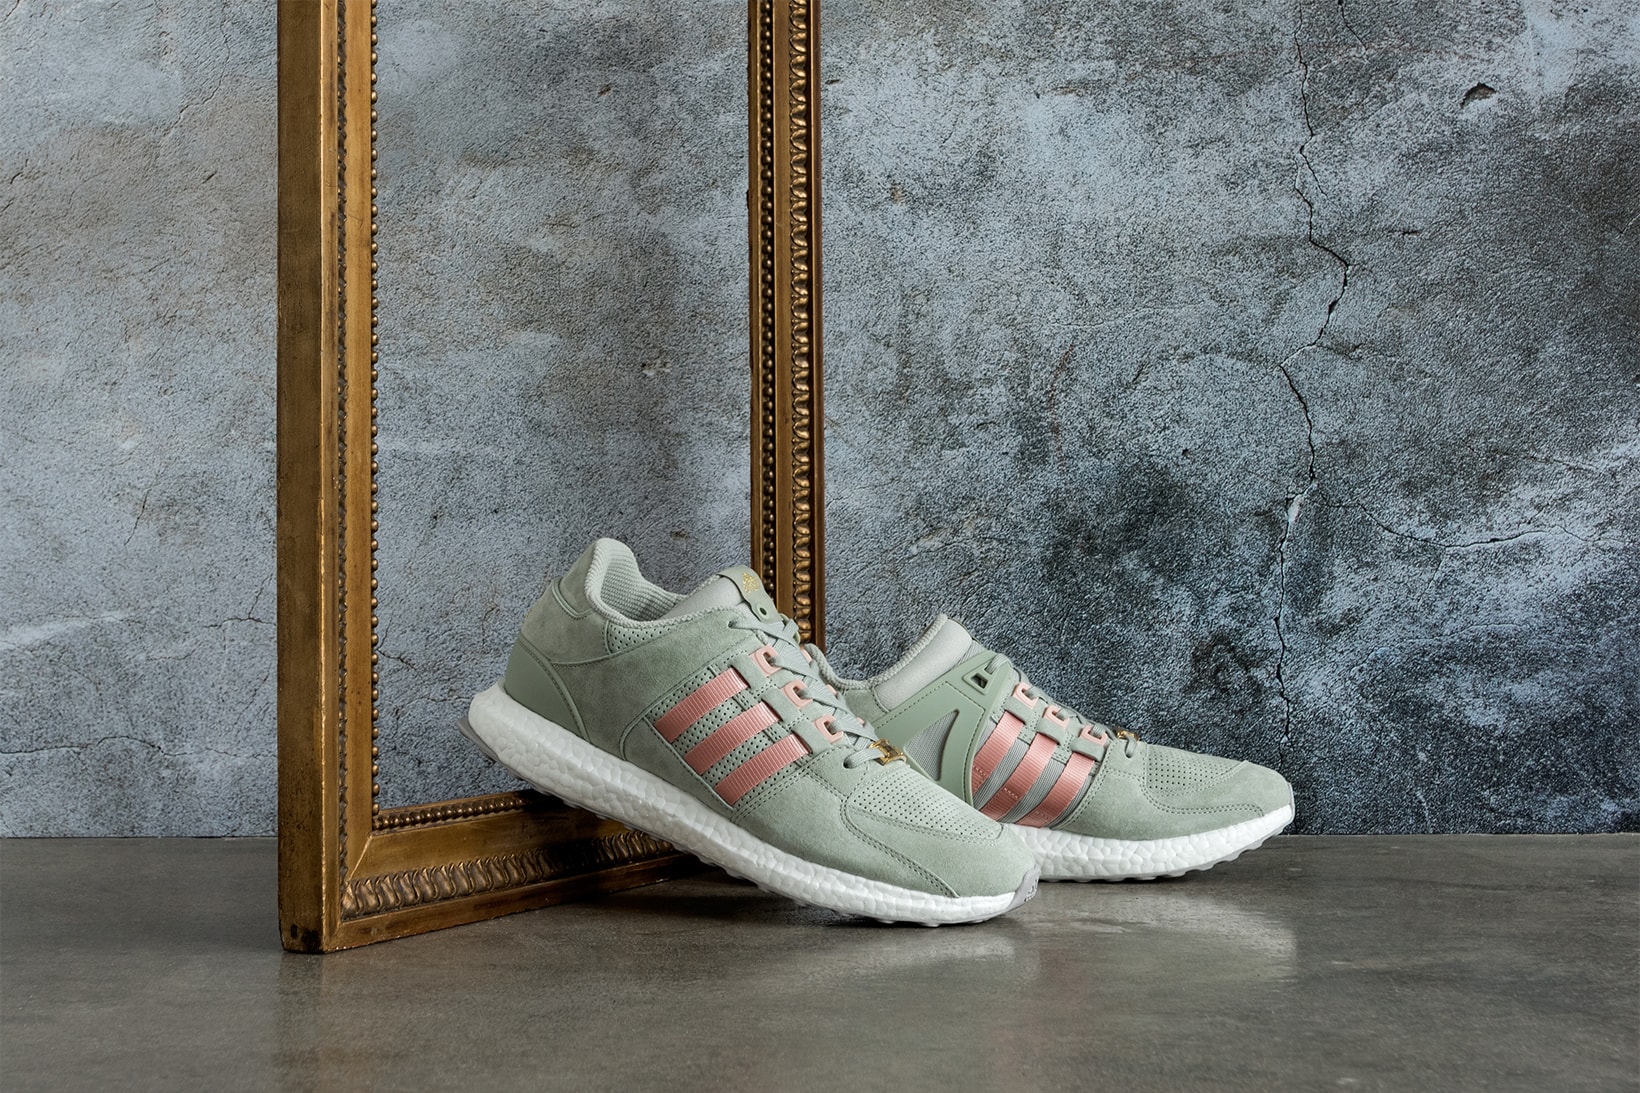 First Look at the adidas Consortium x Concepts EQT Support 93/16